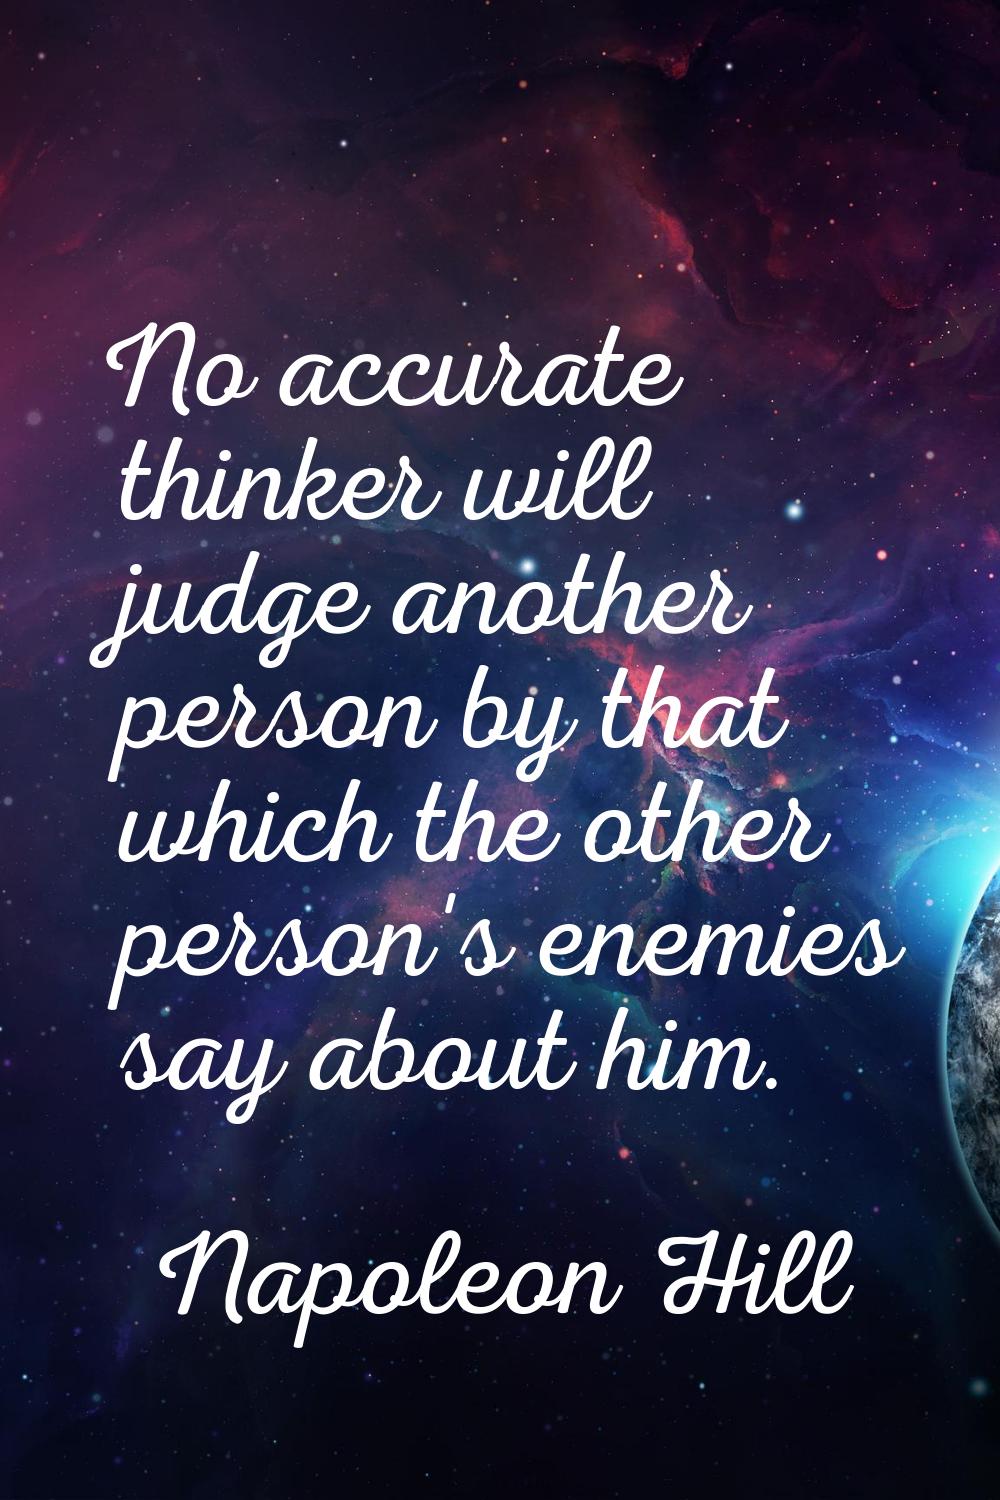 No accurate thinker will judge another person by that which the other person's enemies say about hi